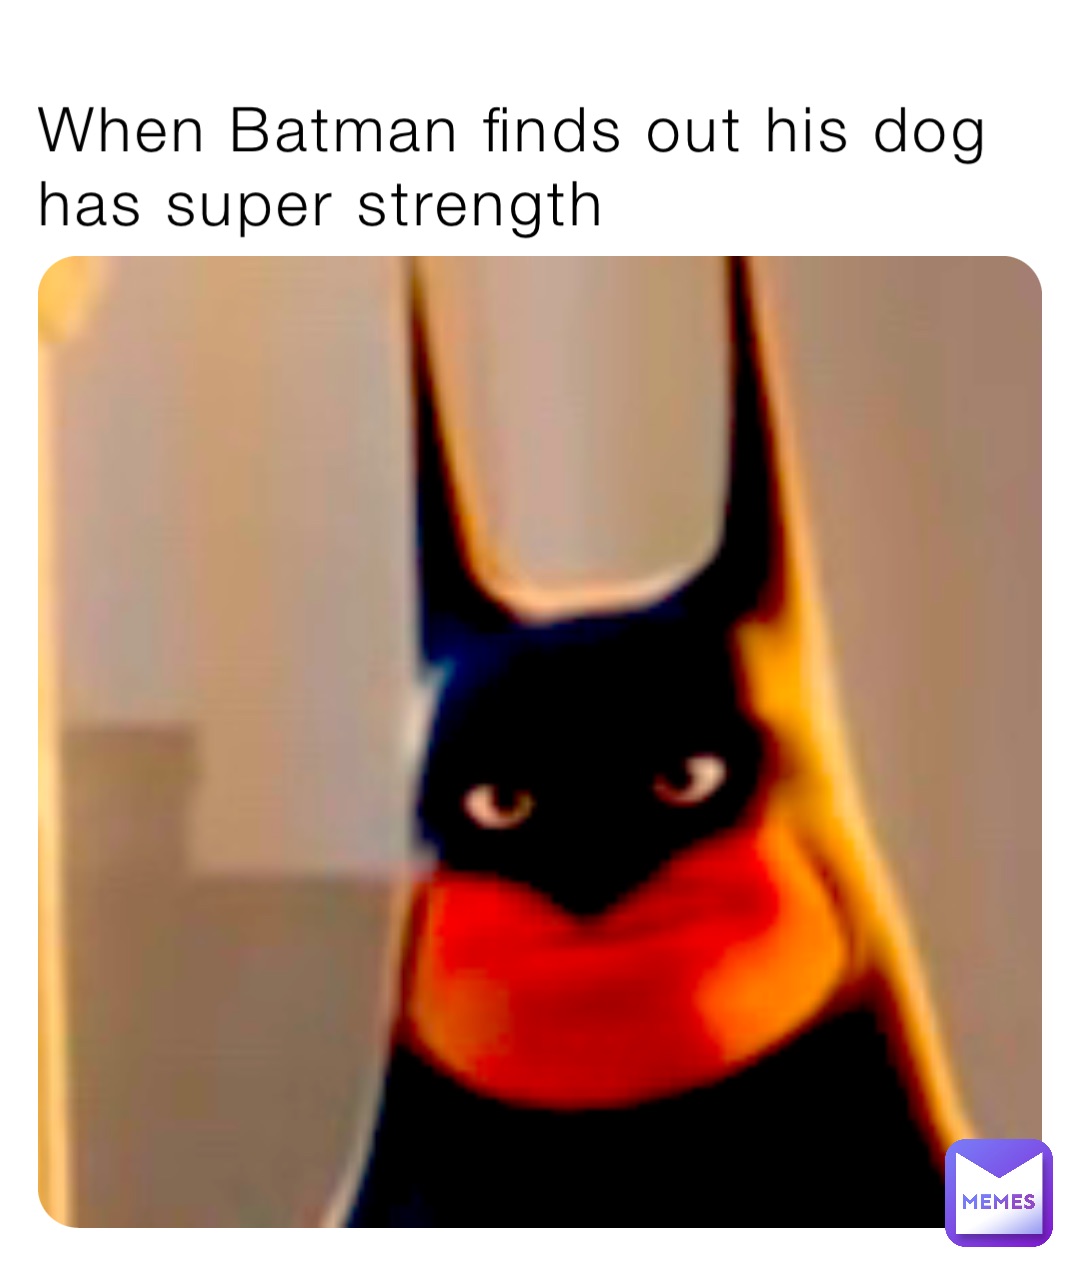 When Batman finds out his dog has super strength